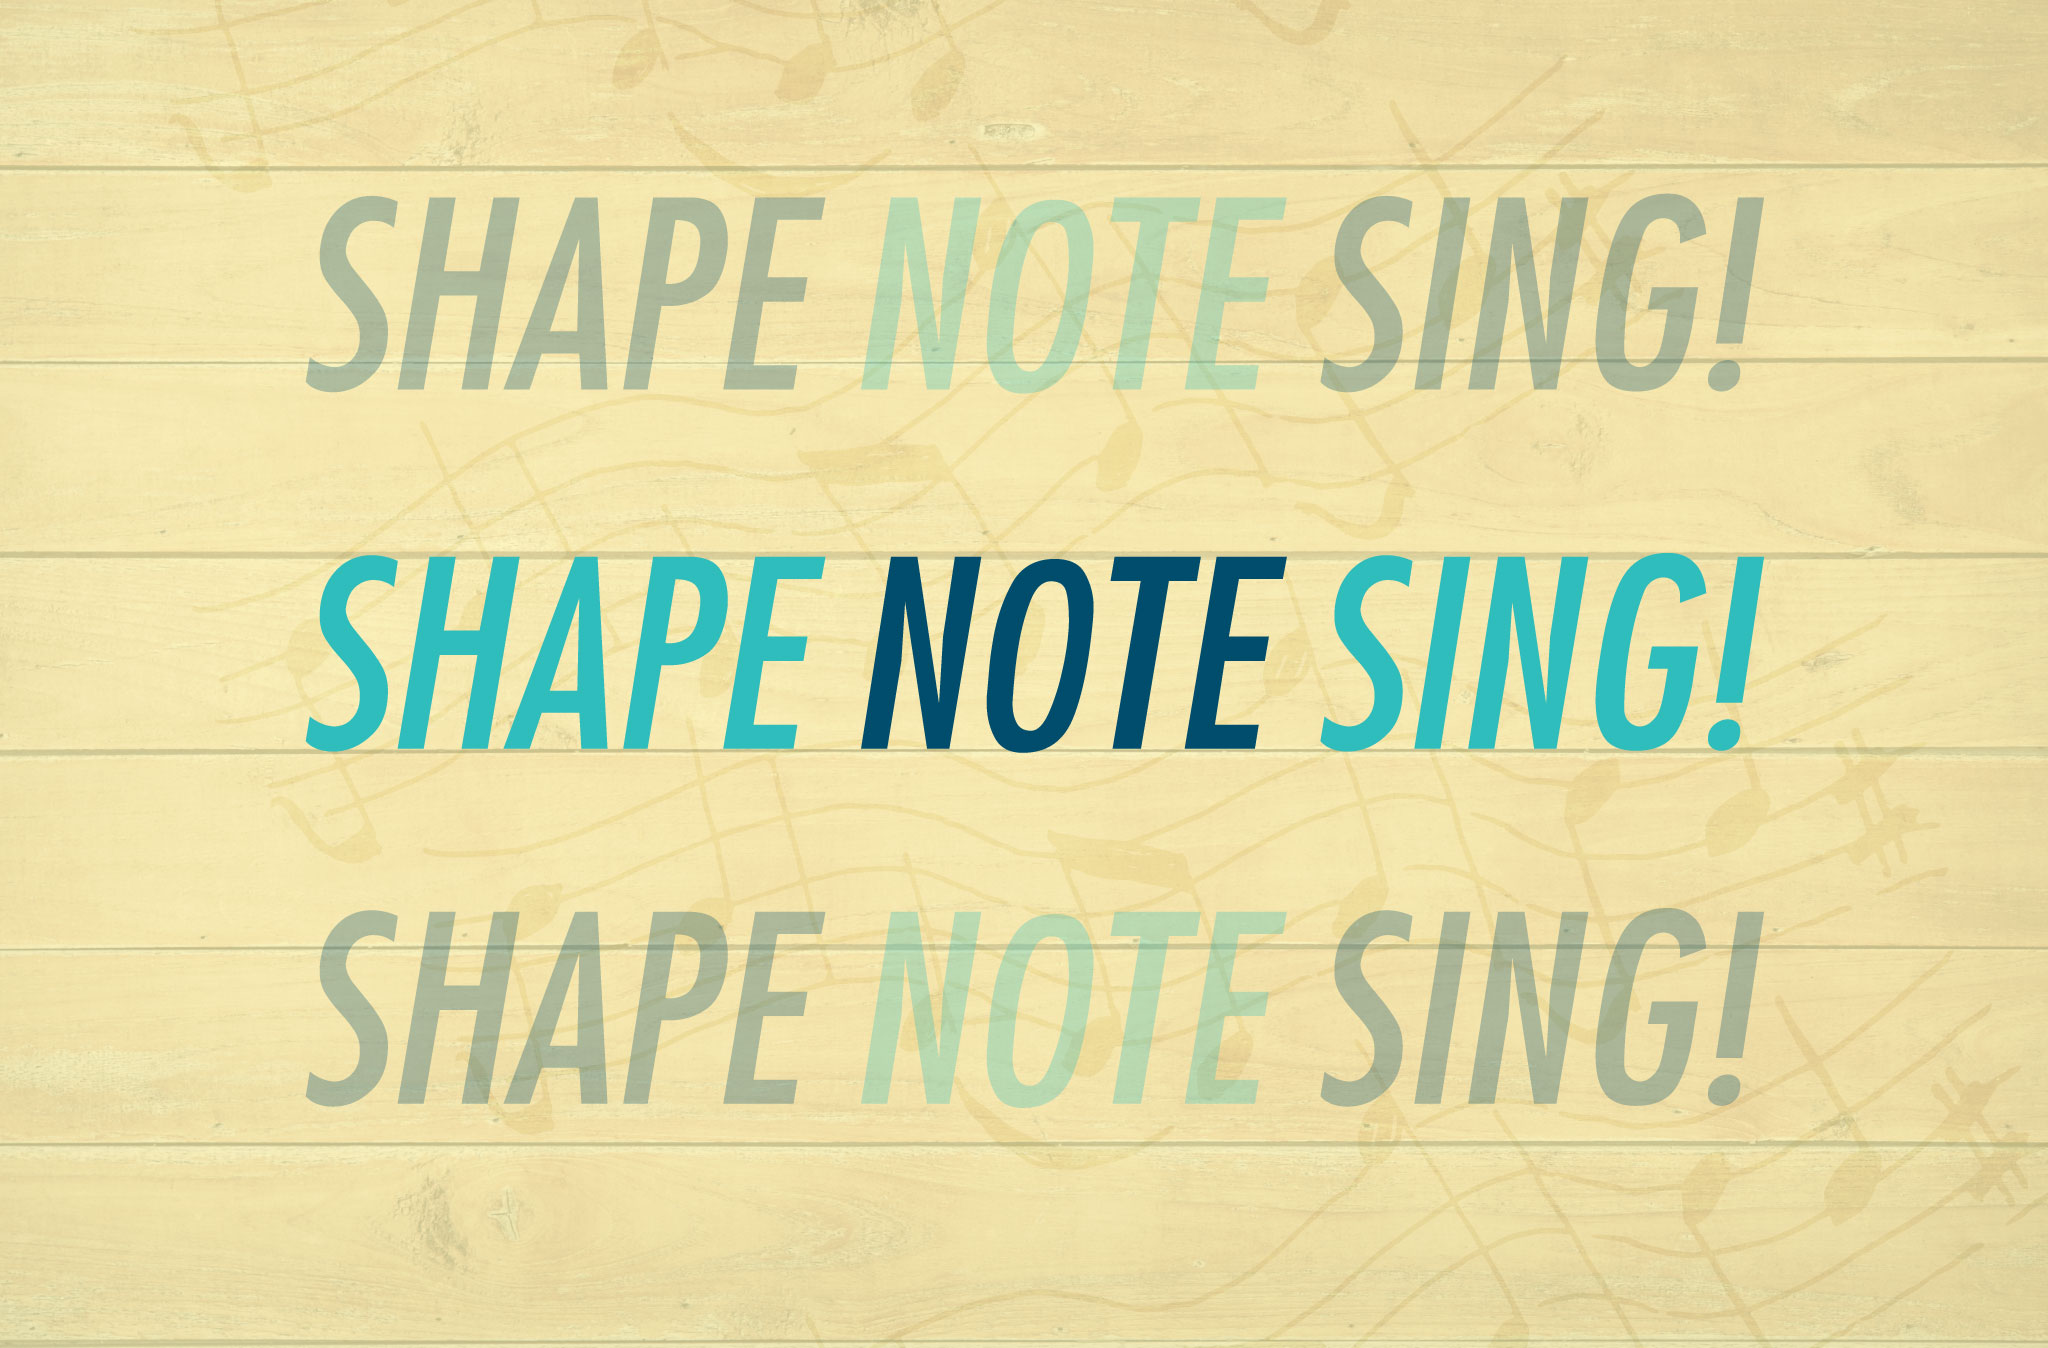 Shape Note Singing at the Museum March 25